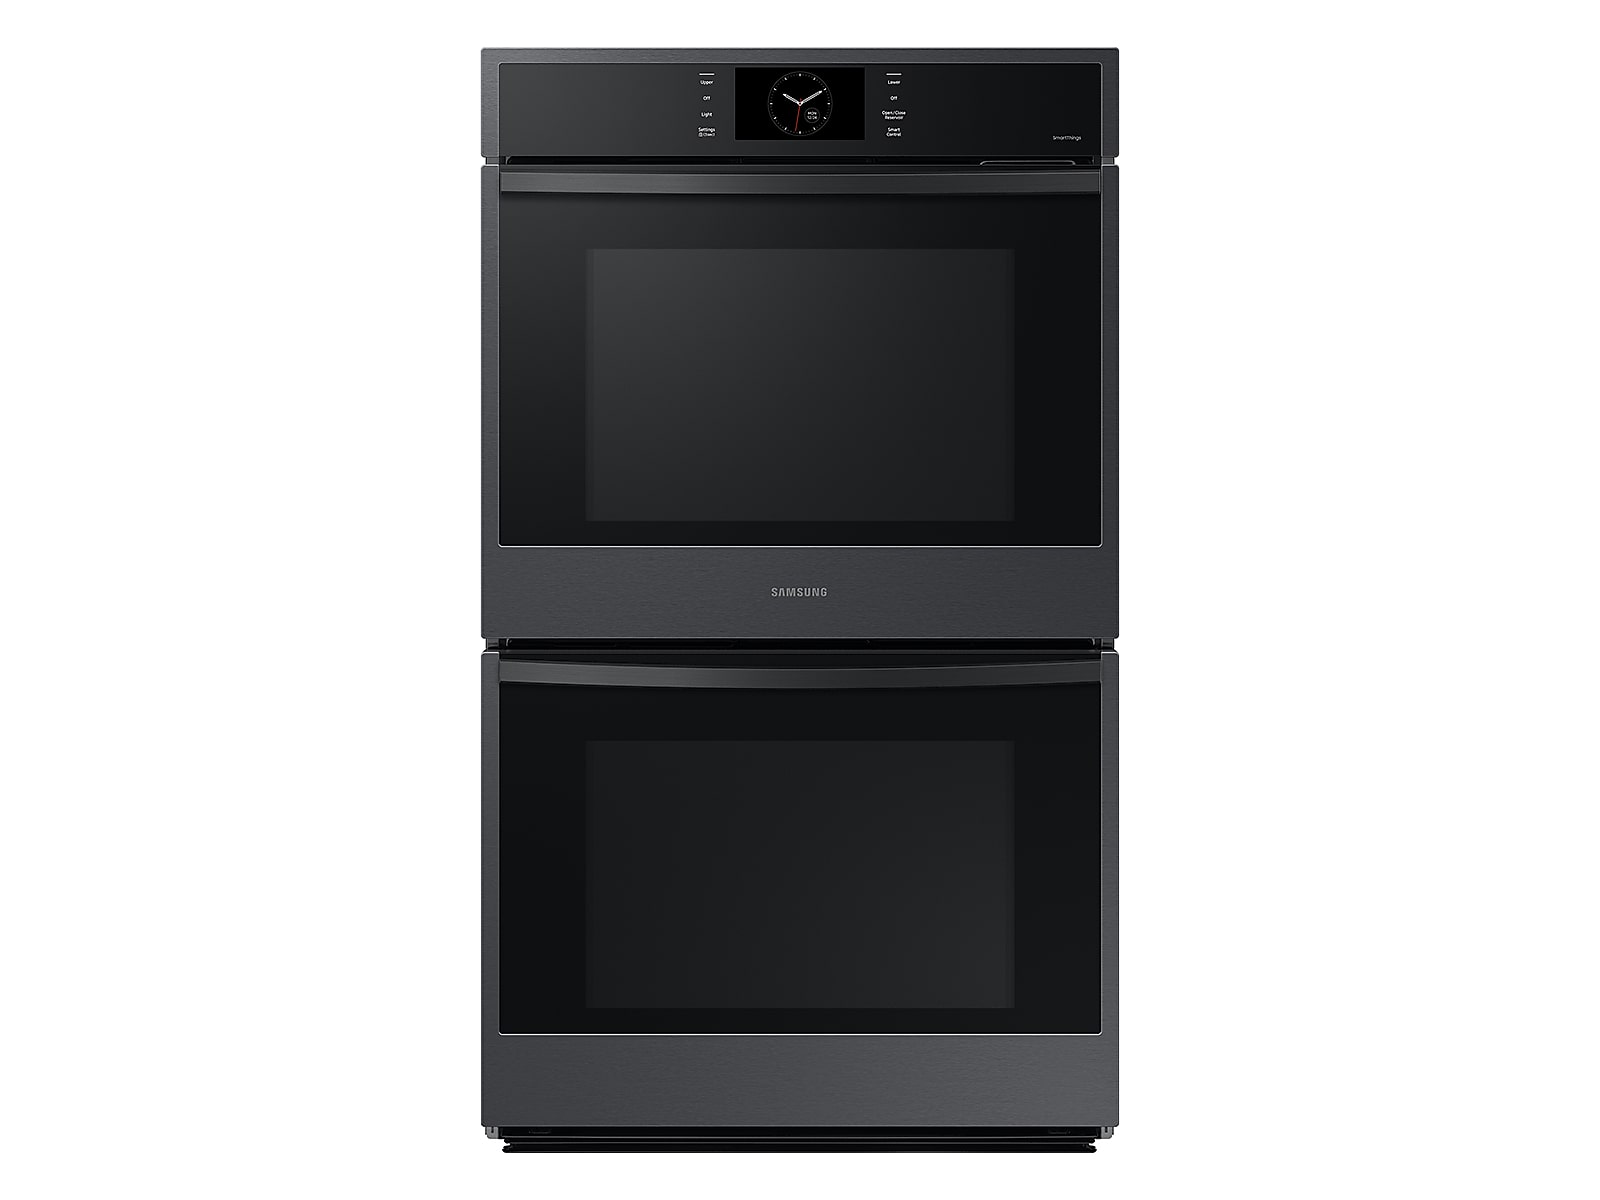 Samsung 30" Double Wall Oven with Steam Cook in Matte in Black Steel(NV51CG600DMTAA)